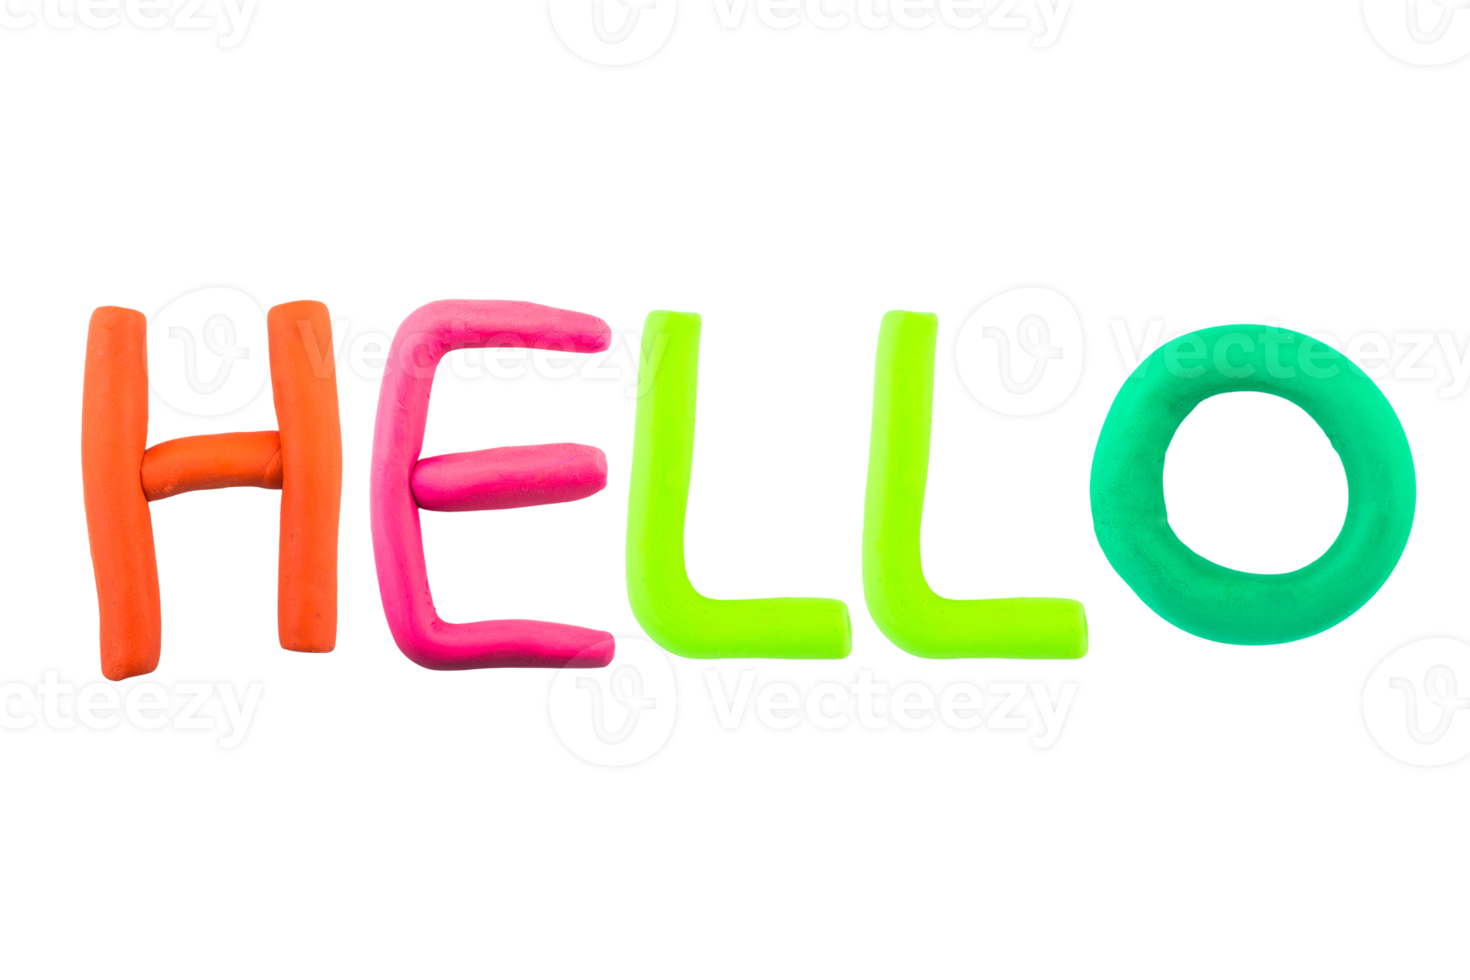 message hello Funny plasticine alphabet letters on white background png